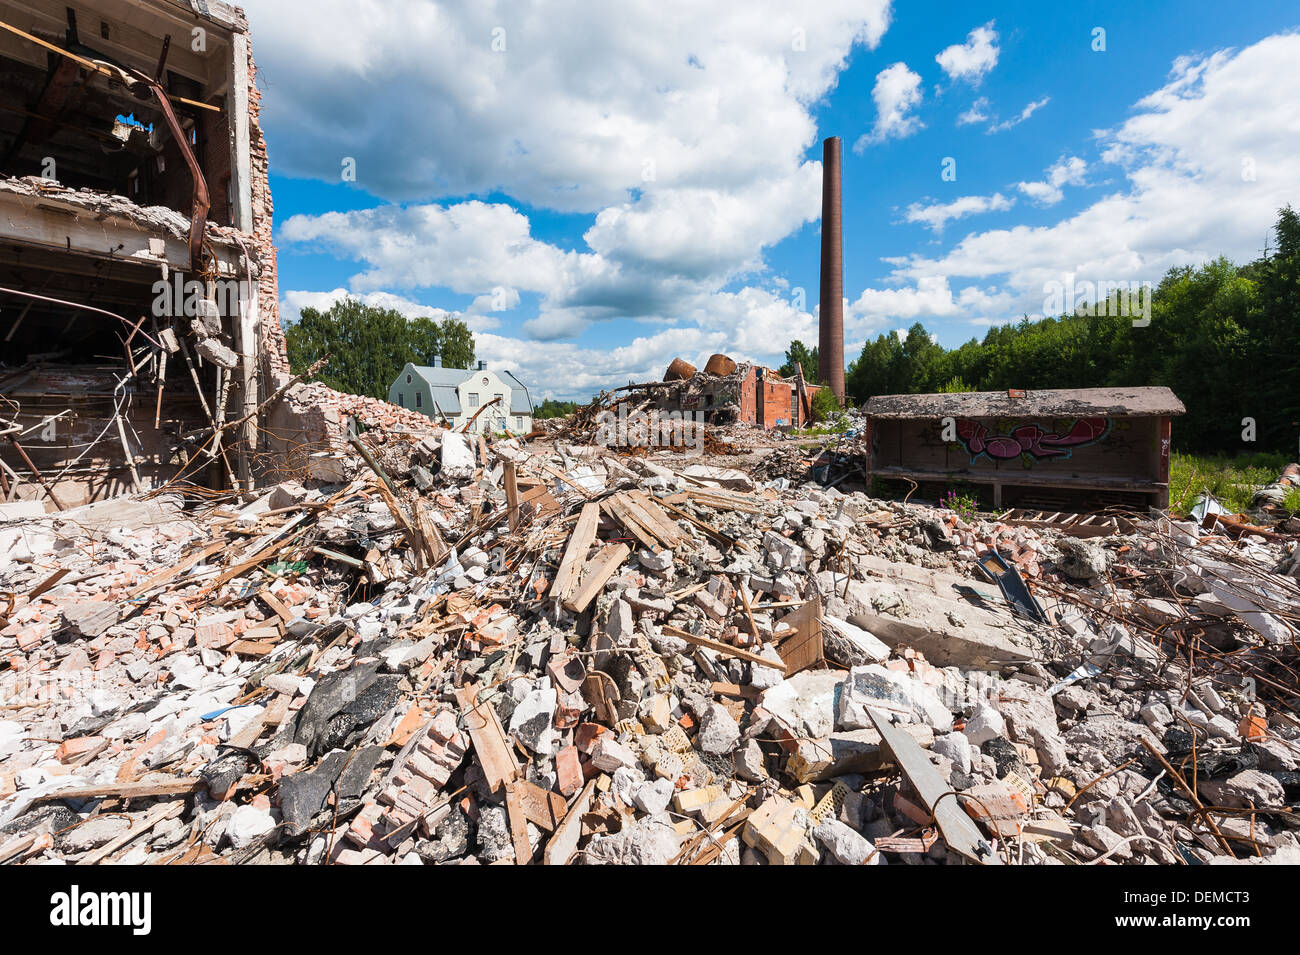 Rubble of destroyed industry building, Sweden. Stock Photo